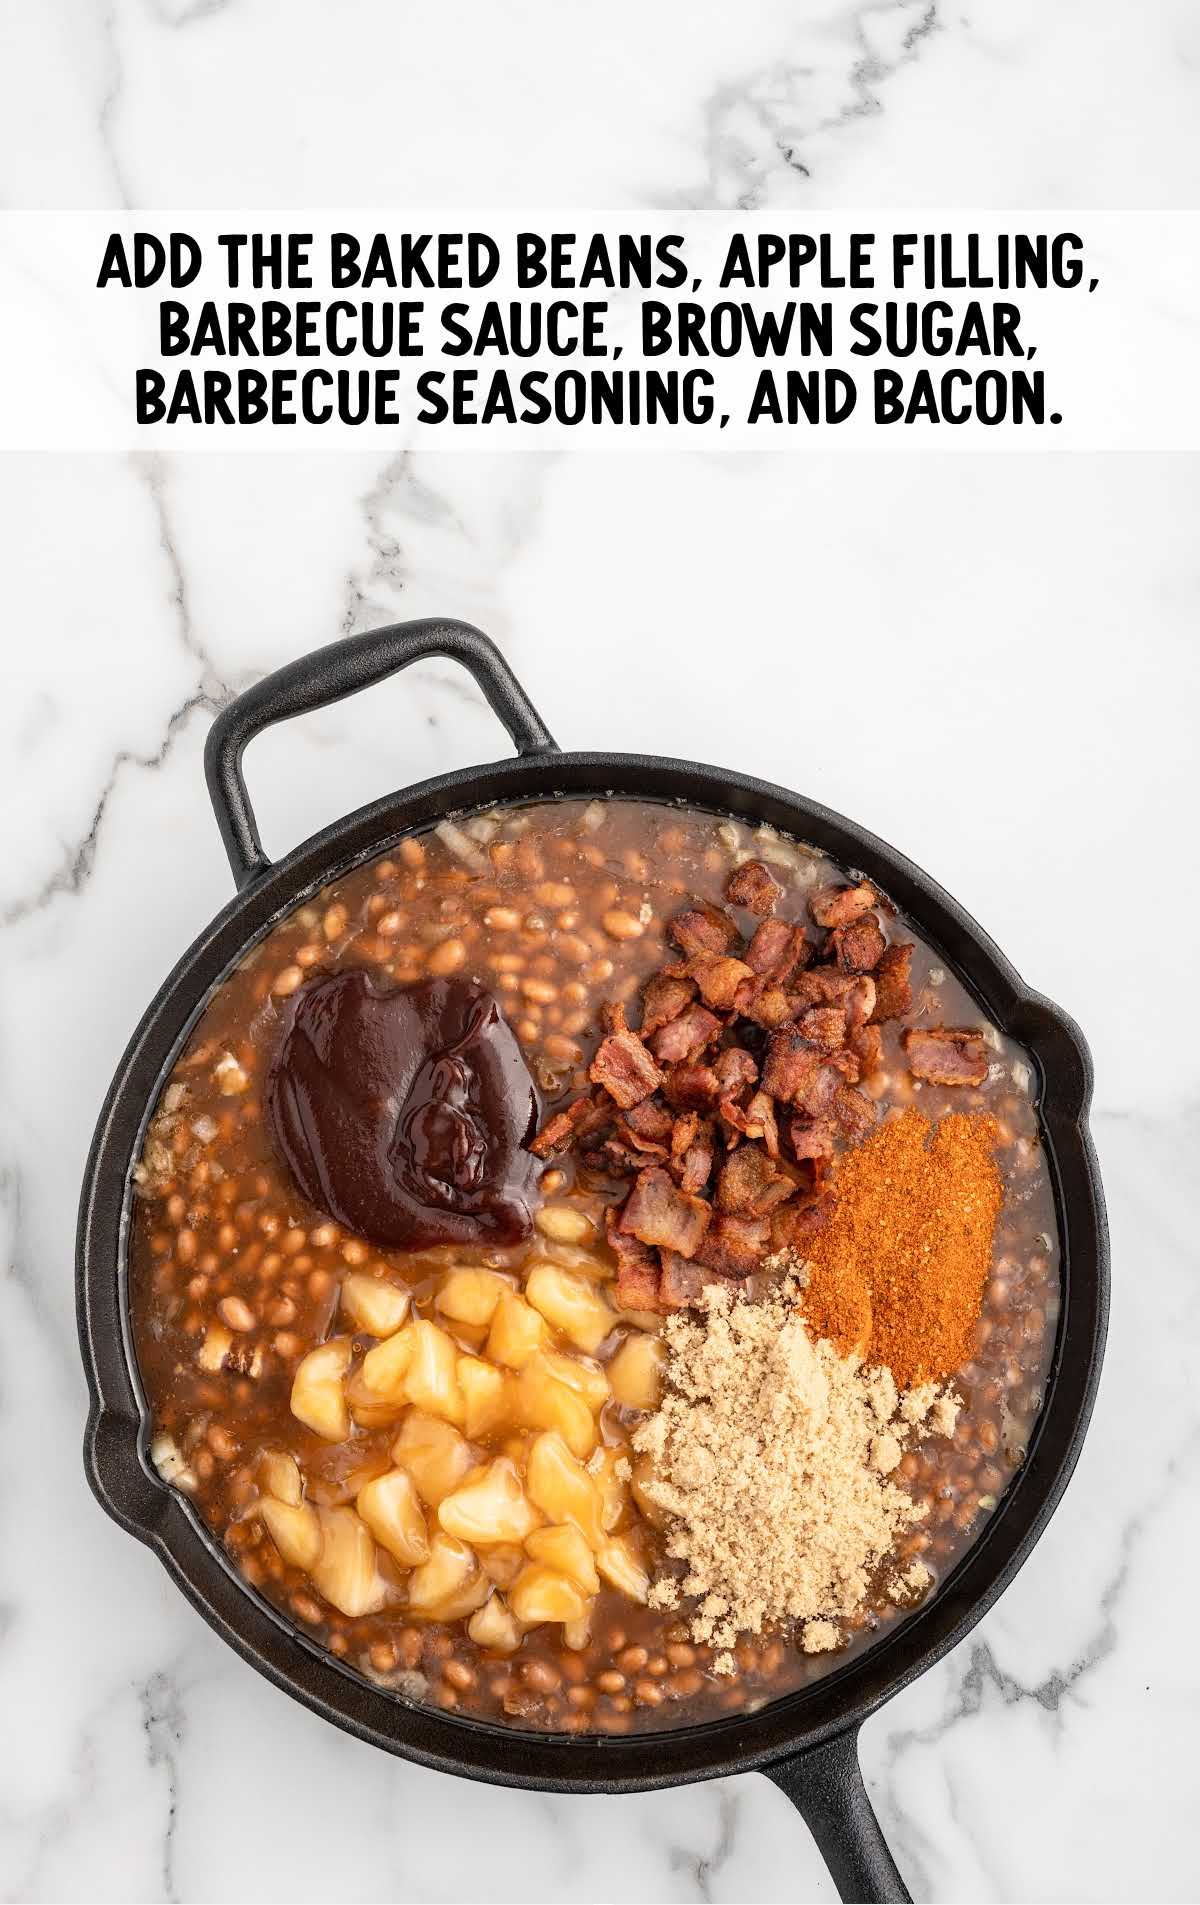 baked beans, apple pie filling, bottled barbecue sauce, light brown sugar, barbecue seasoning blend, and the cooked bacon pieces added to the skillet